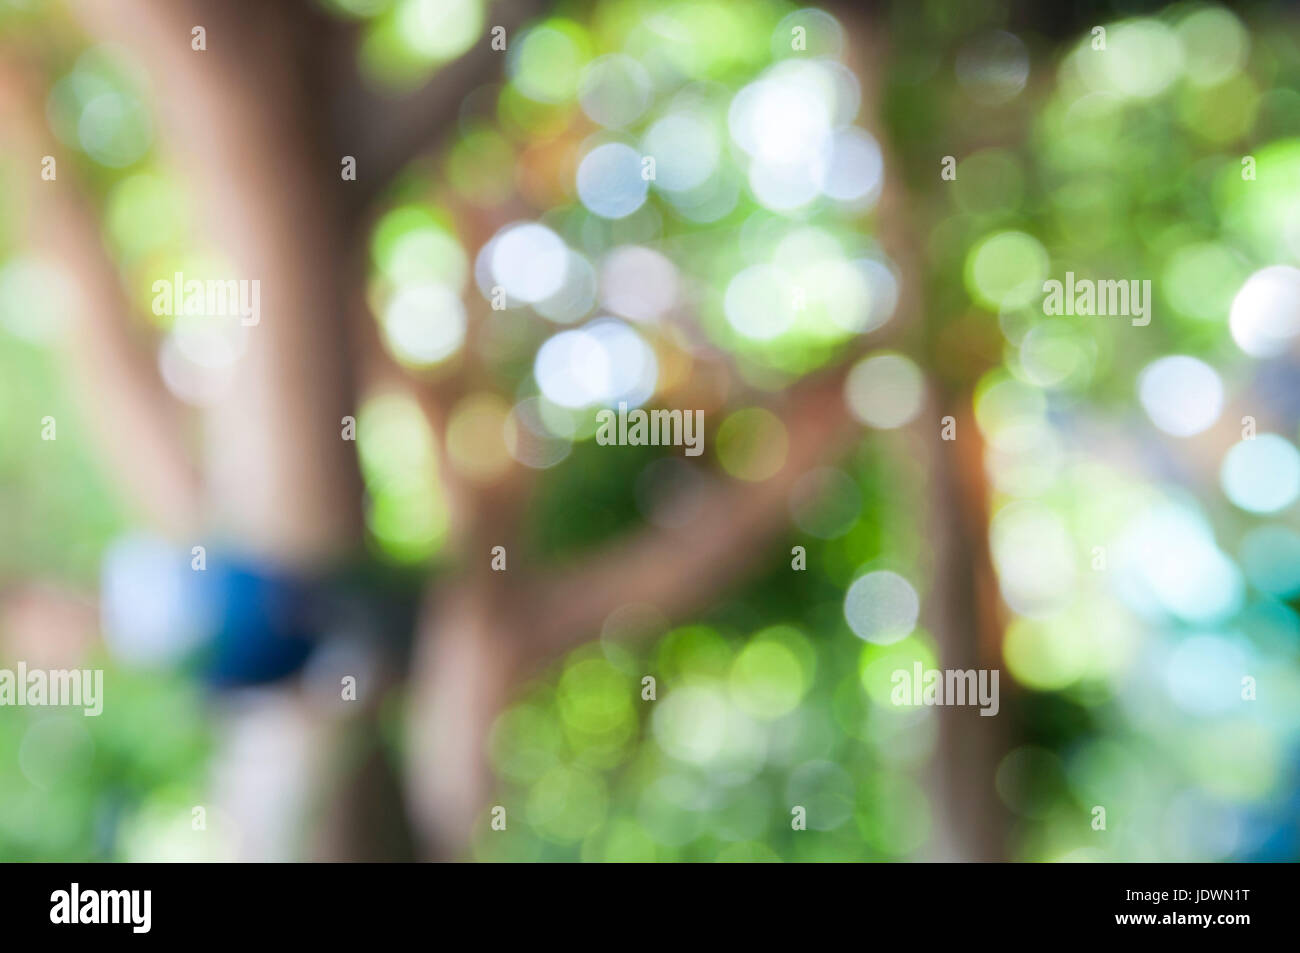 blurred of fresh healthy green bio background with abstract blurred foliage and bright summer sunlight Stock Photo